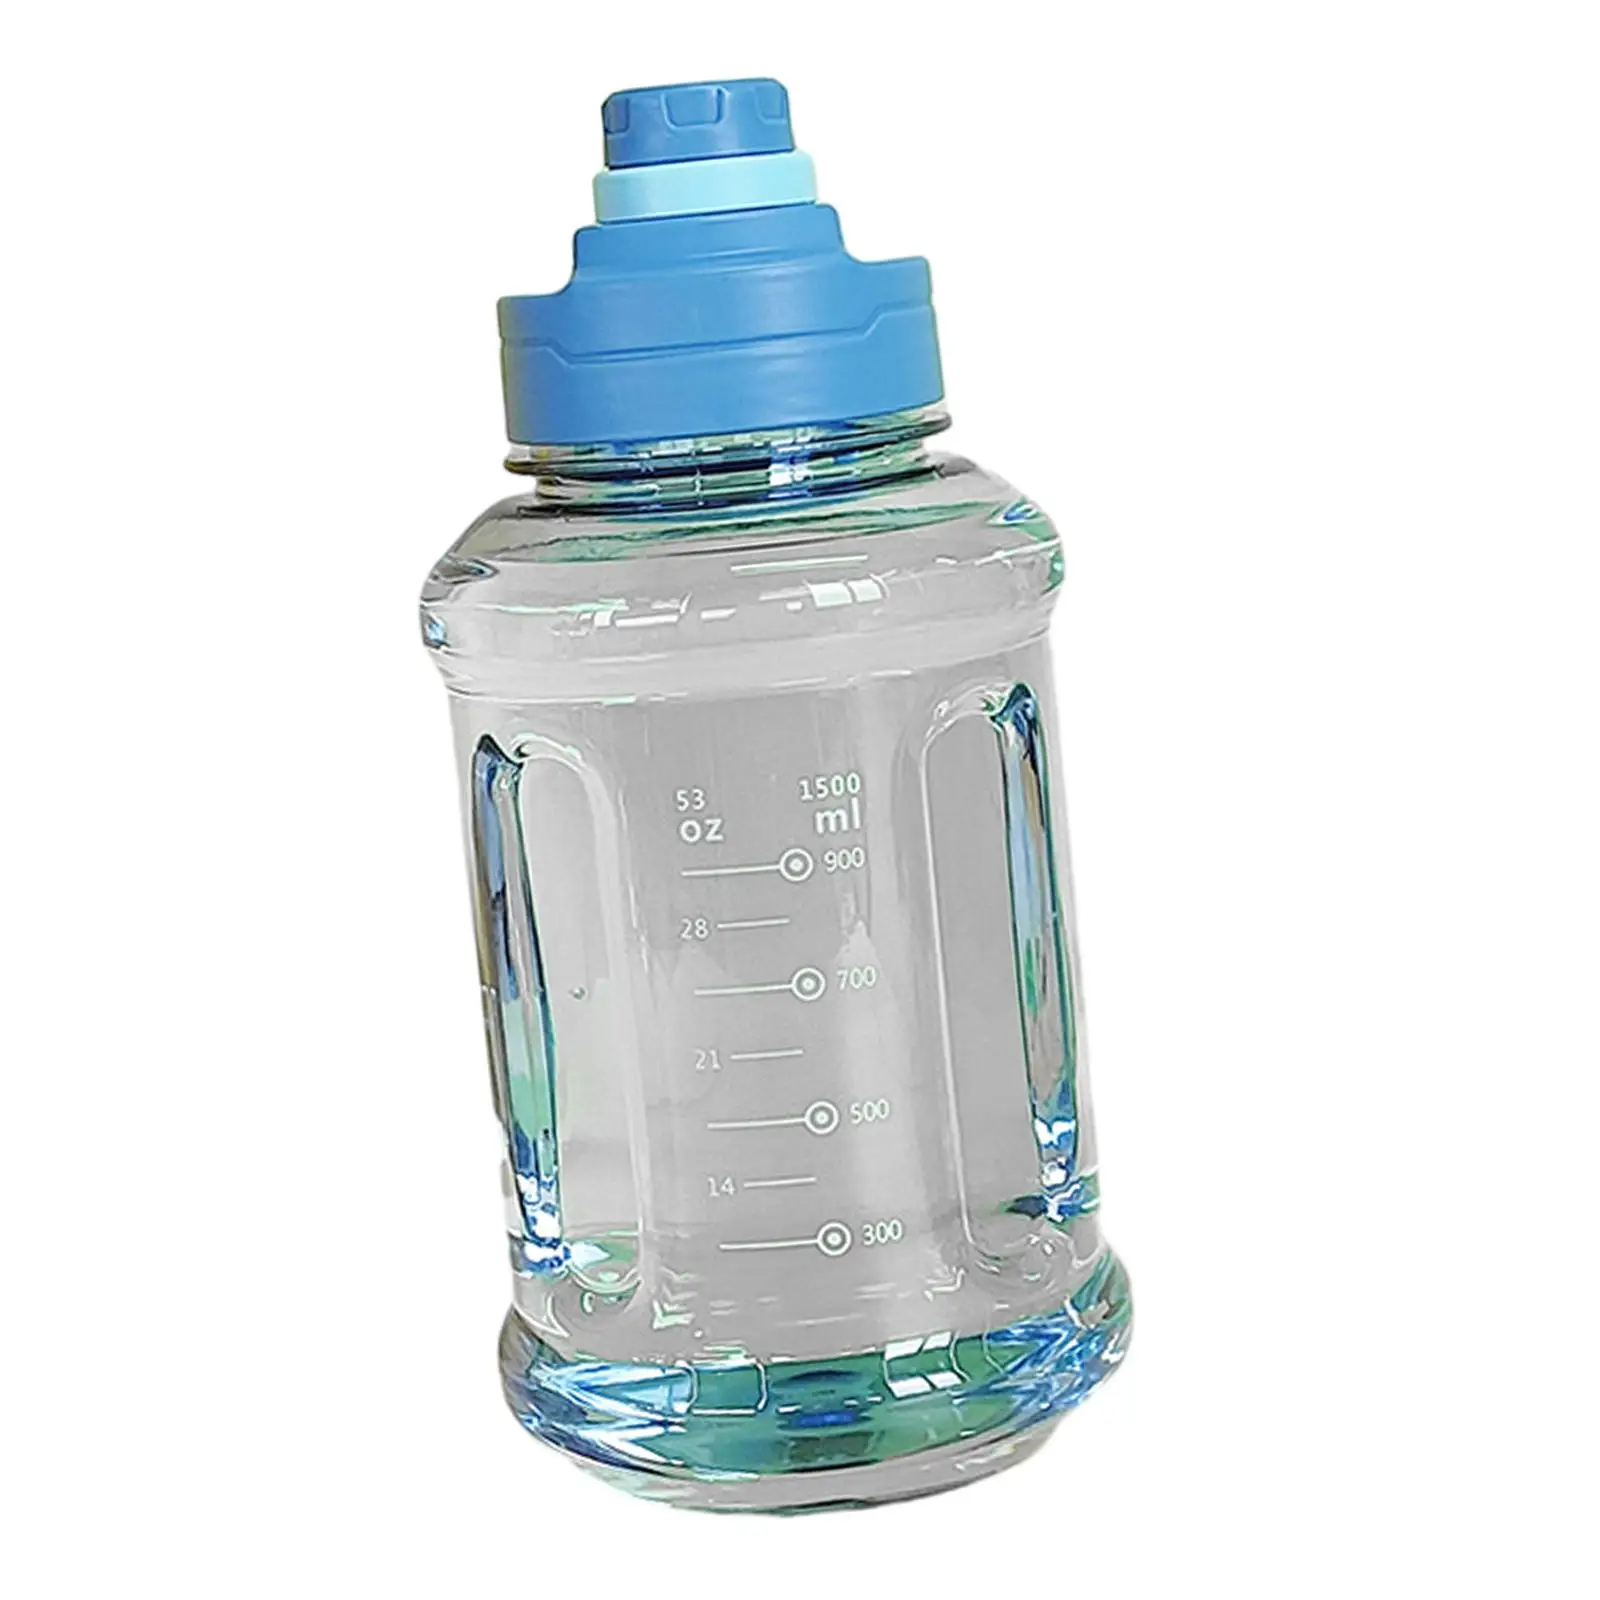 Gym Bottle Sports Water Bottle 1.5L Easy to Use Large Capacity Reusable 11x24cm with Scale Big Water Bottle Bottle